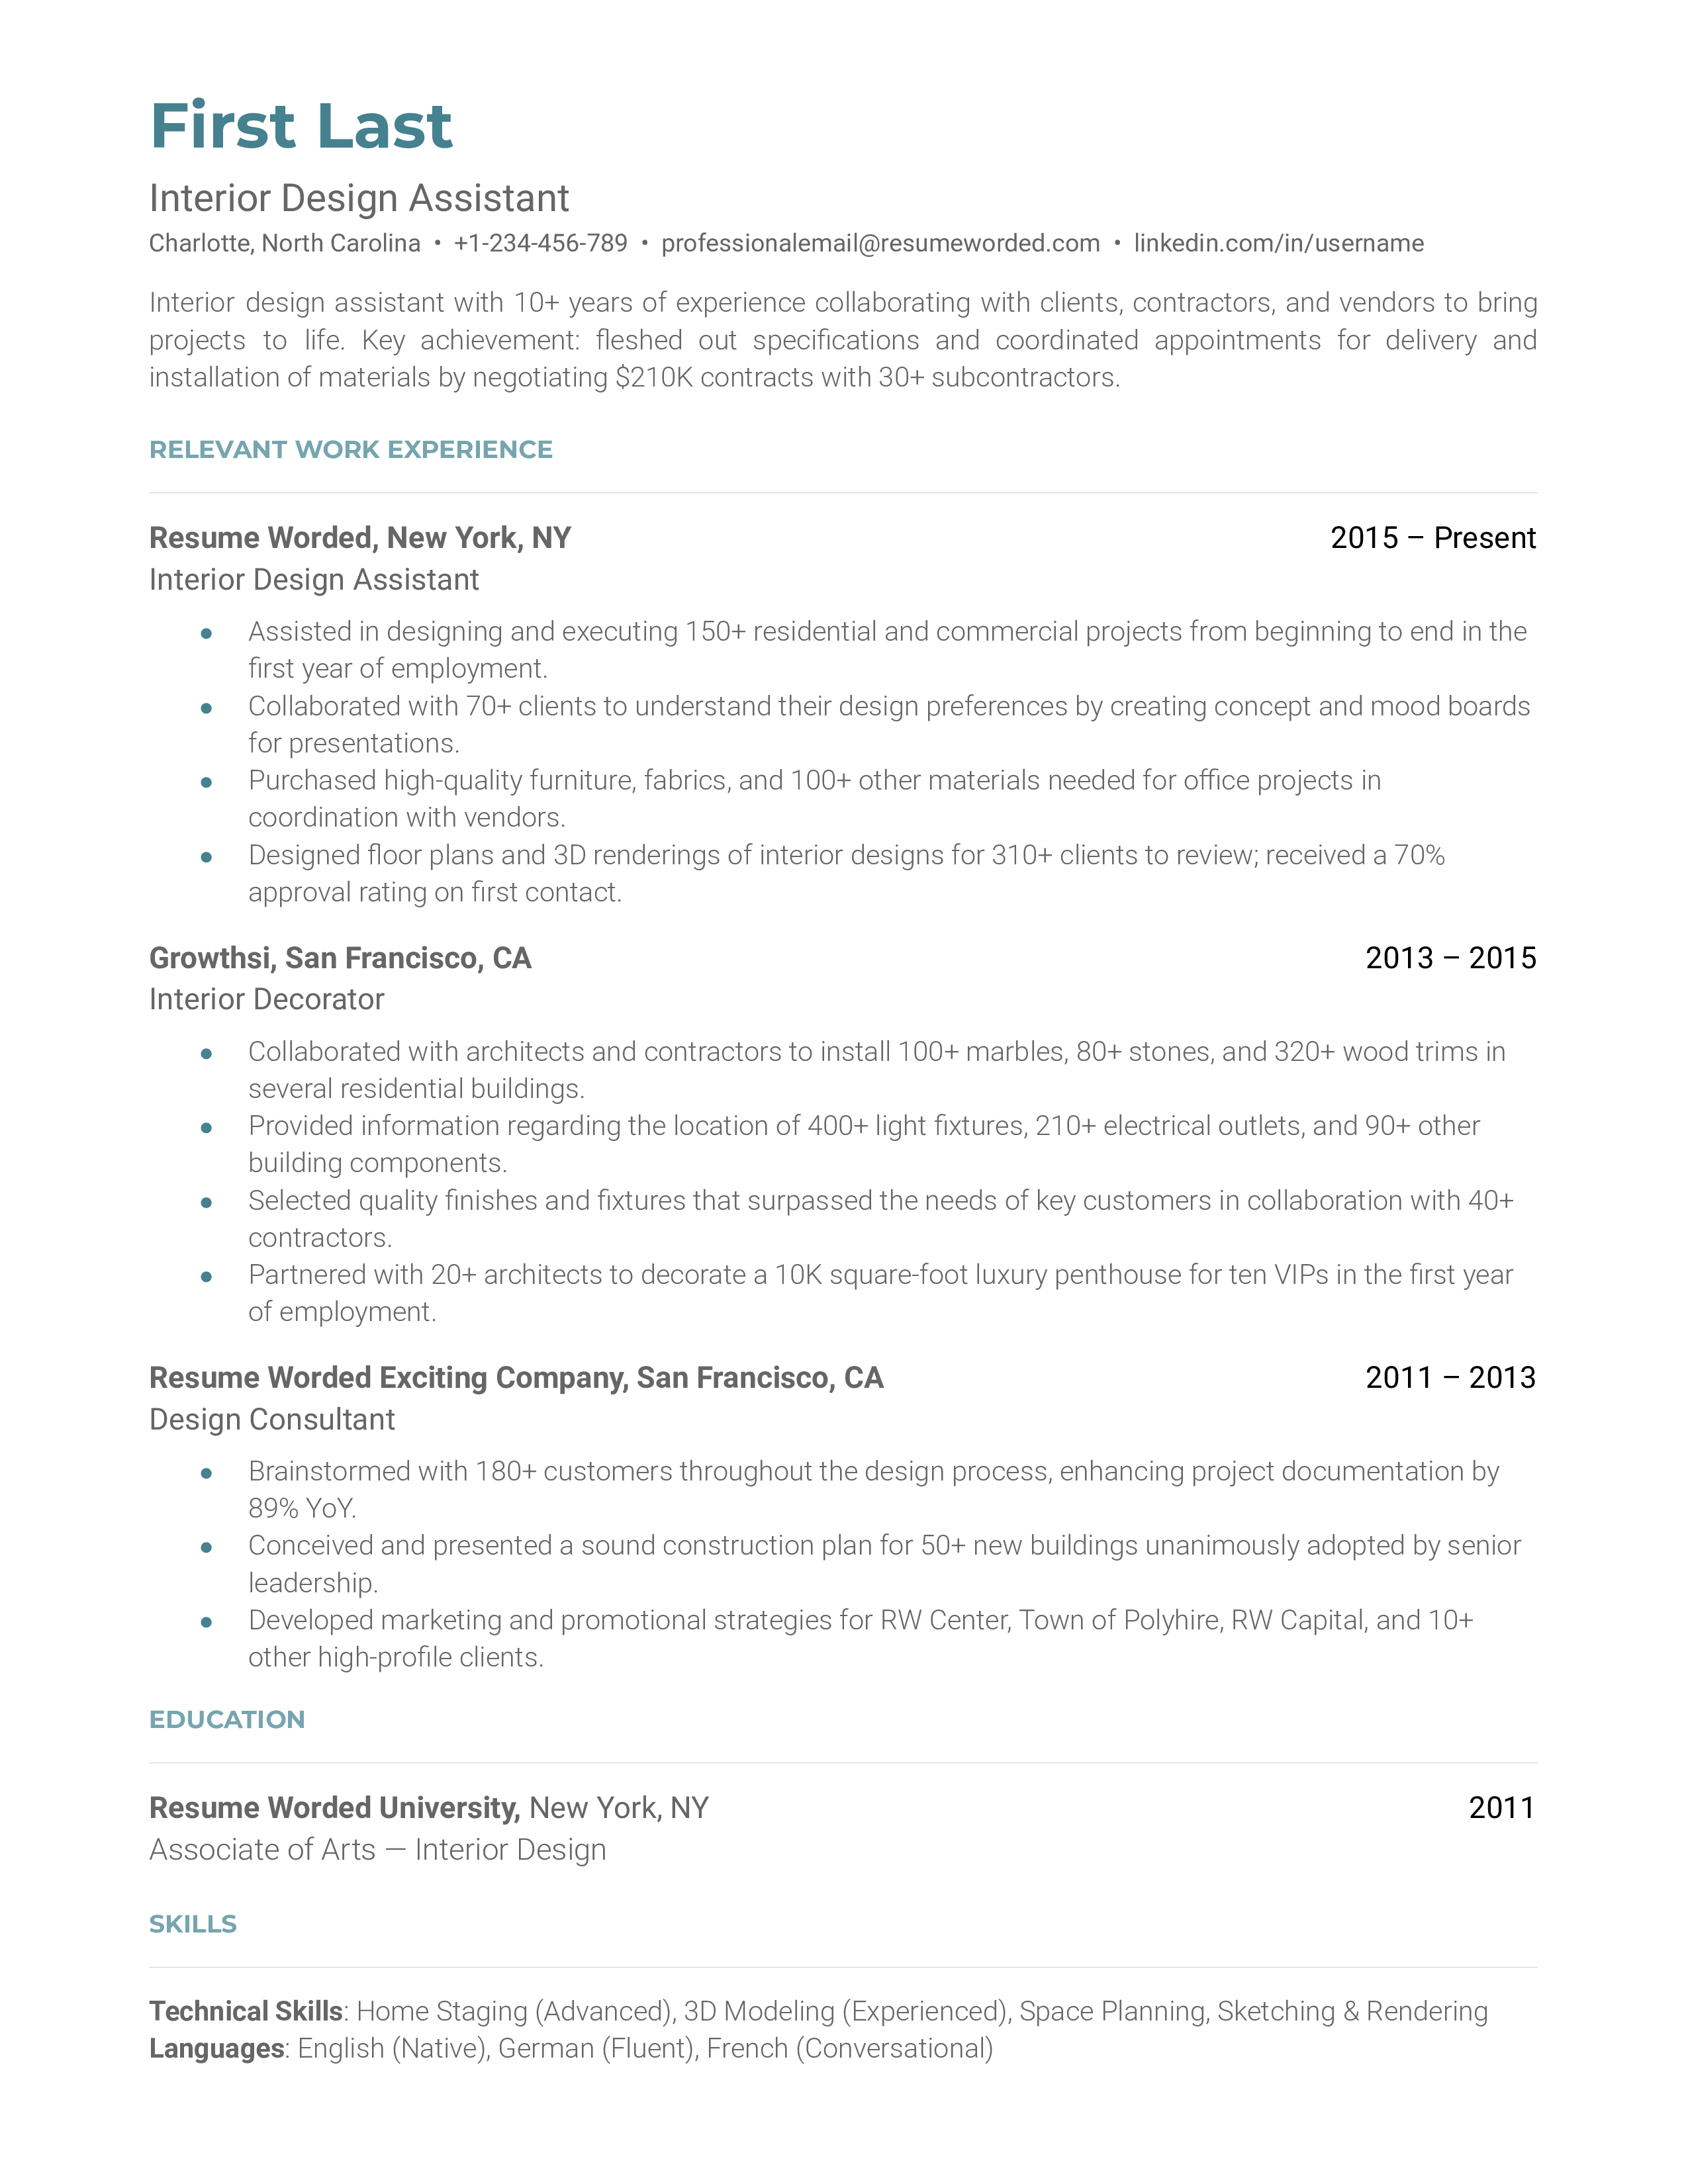 Interior Design Assistant's CV highlighting creative and technical skills.